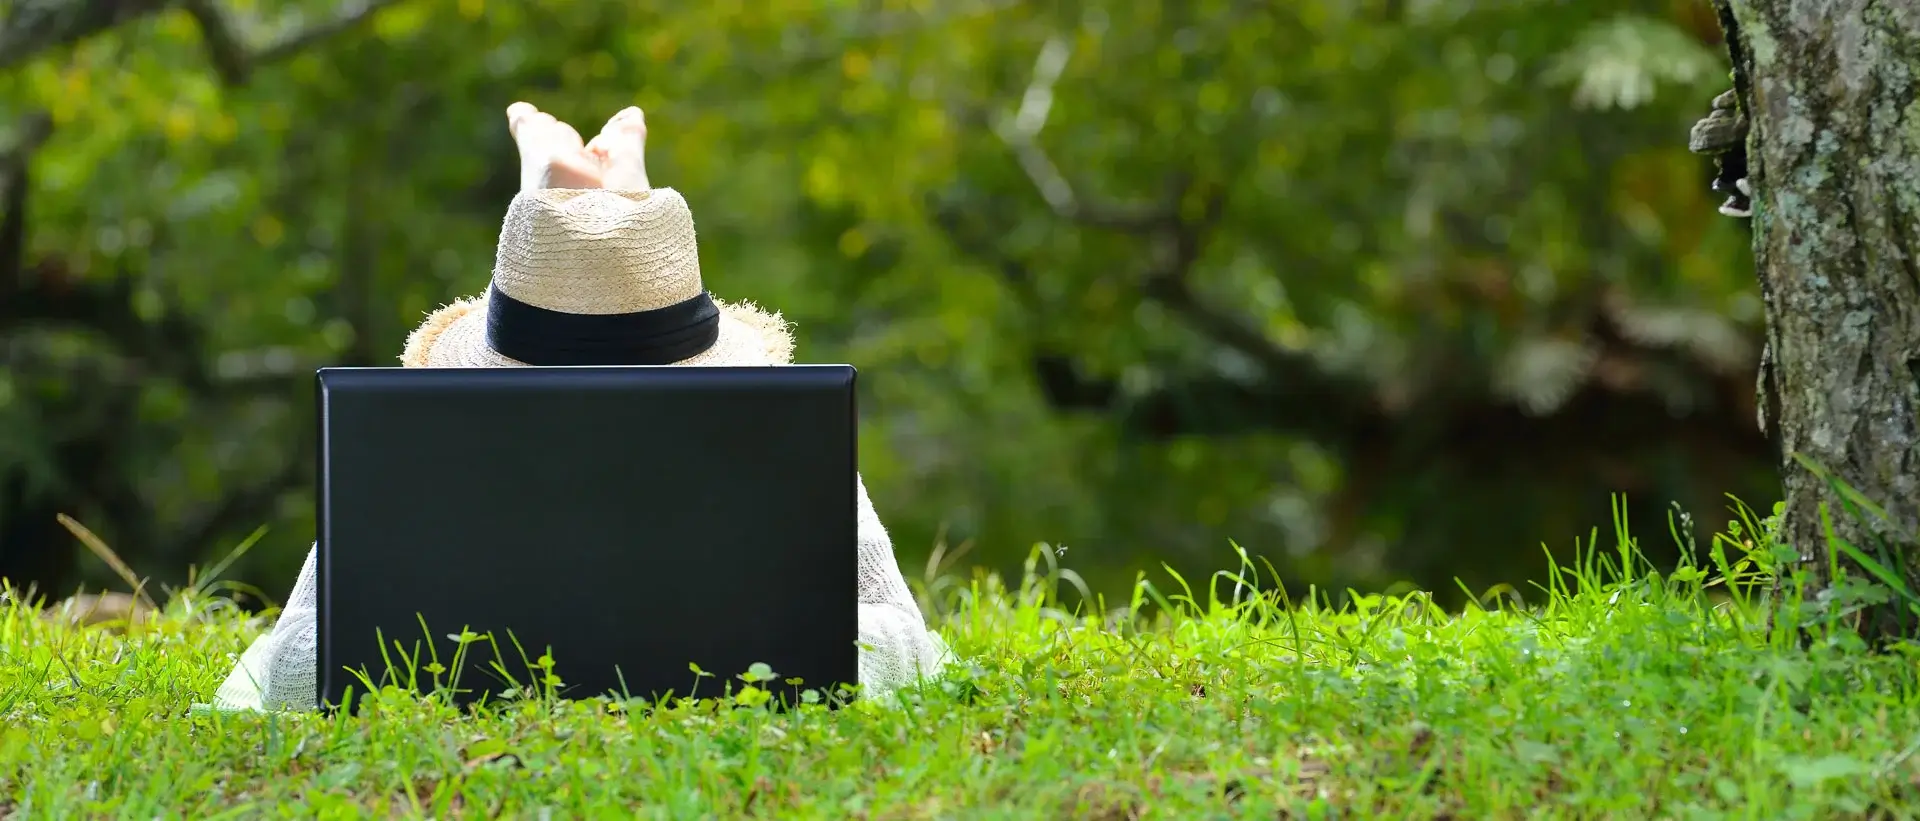 picture of a person with a hat lying on the grass in front of a computer